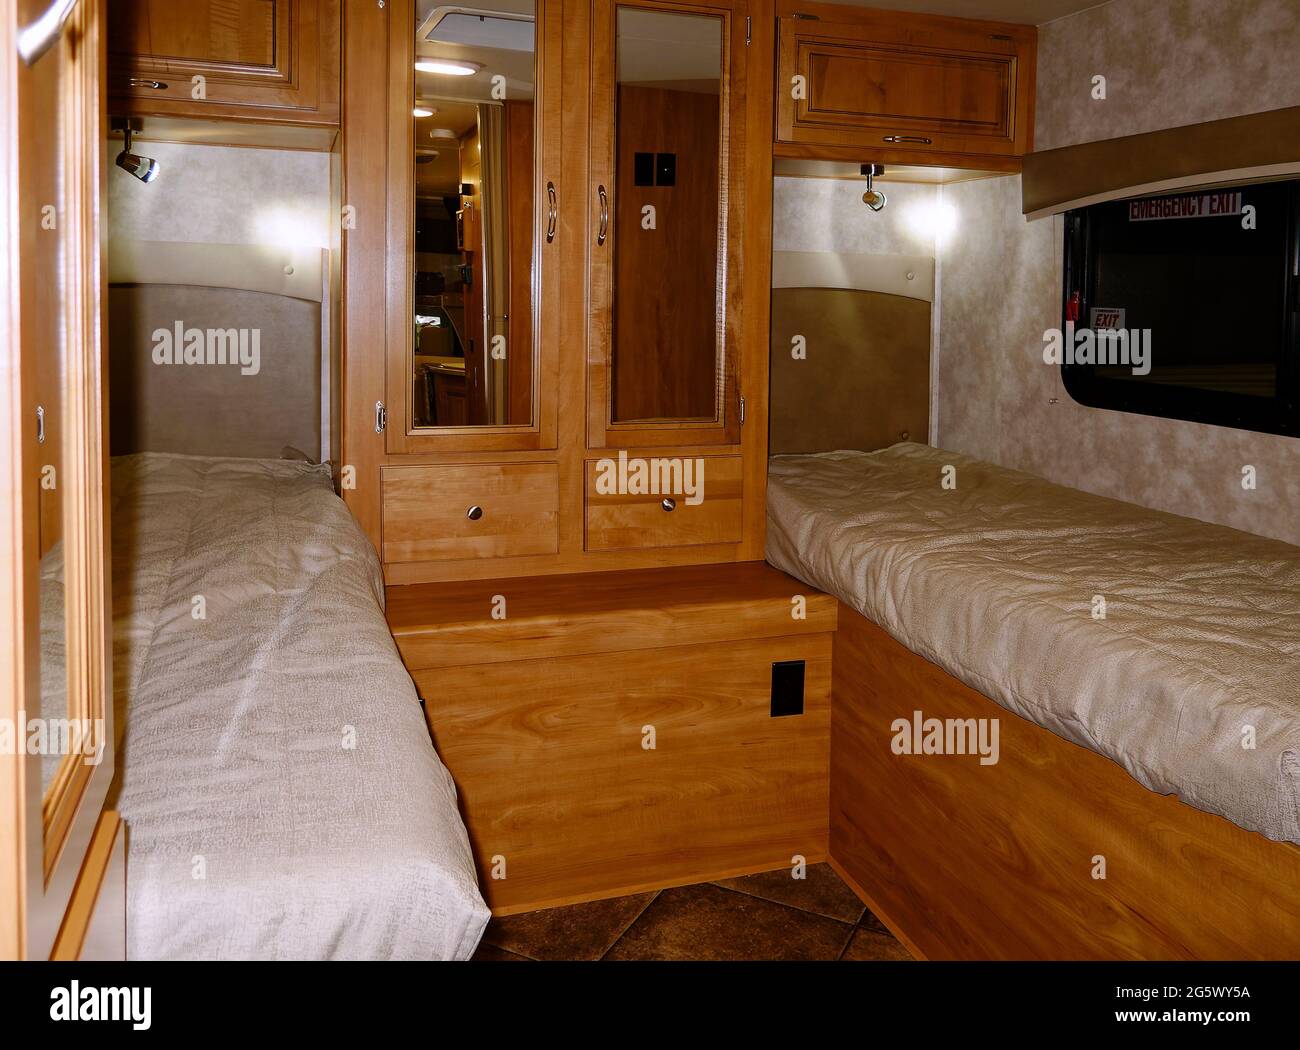 motorhome bedroom, twin beds, wardrobe, mirrored doors, drawers, cabinets, reading lights, class C recreational vehicle, RV, transportation, camper, N Stock Photo